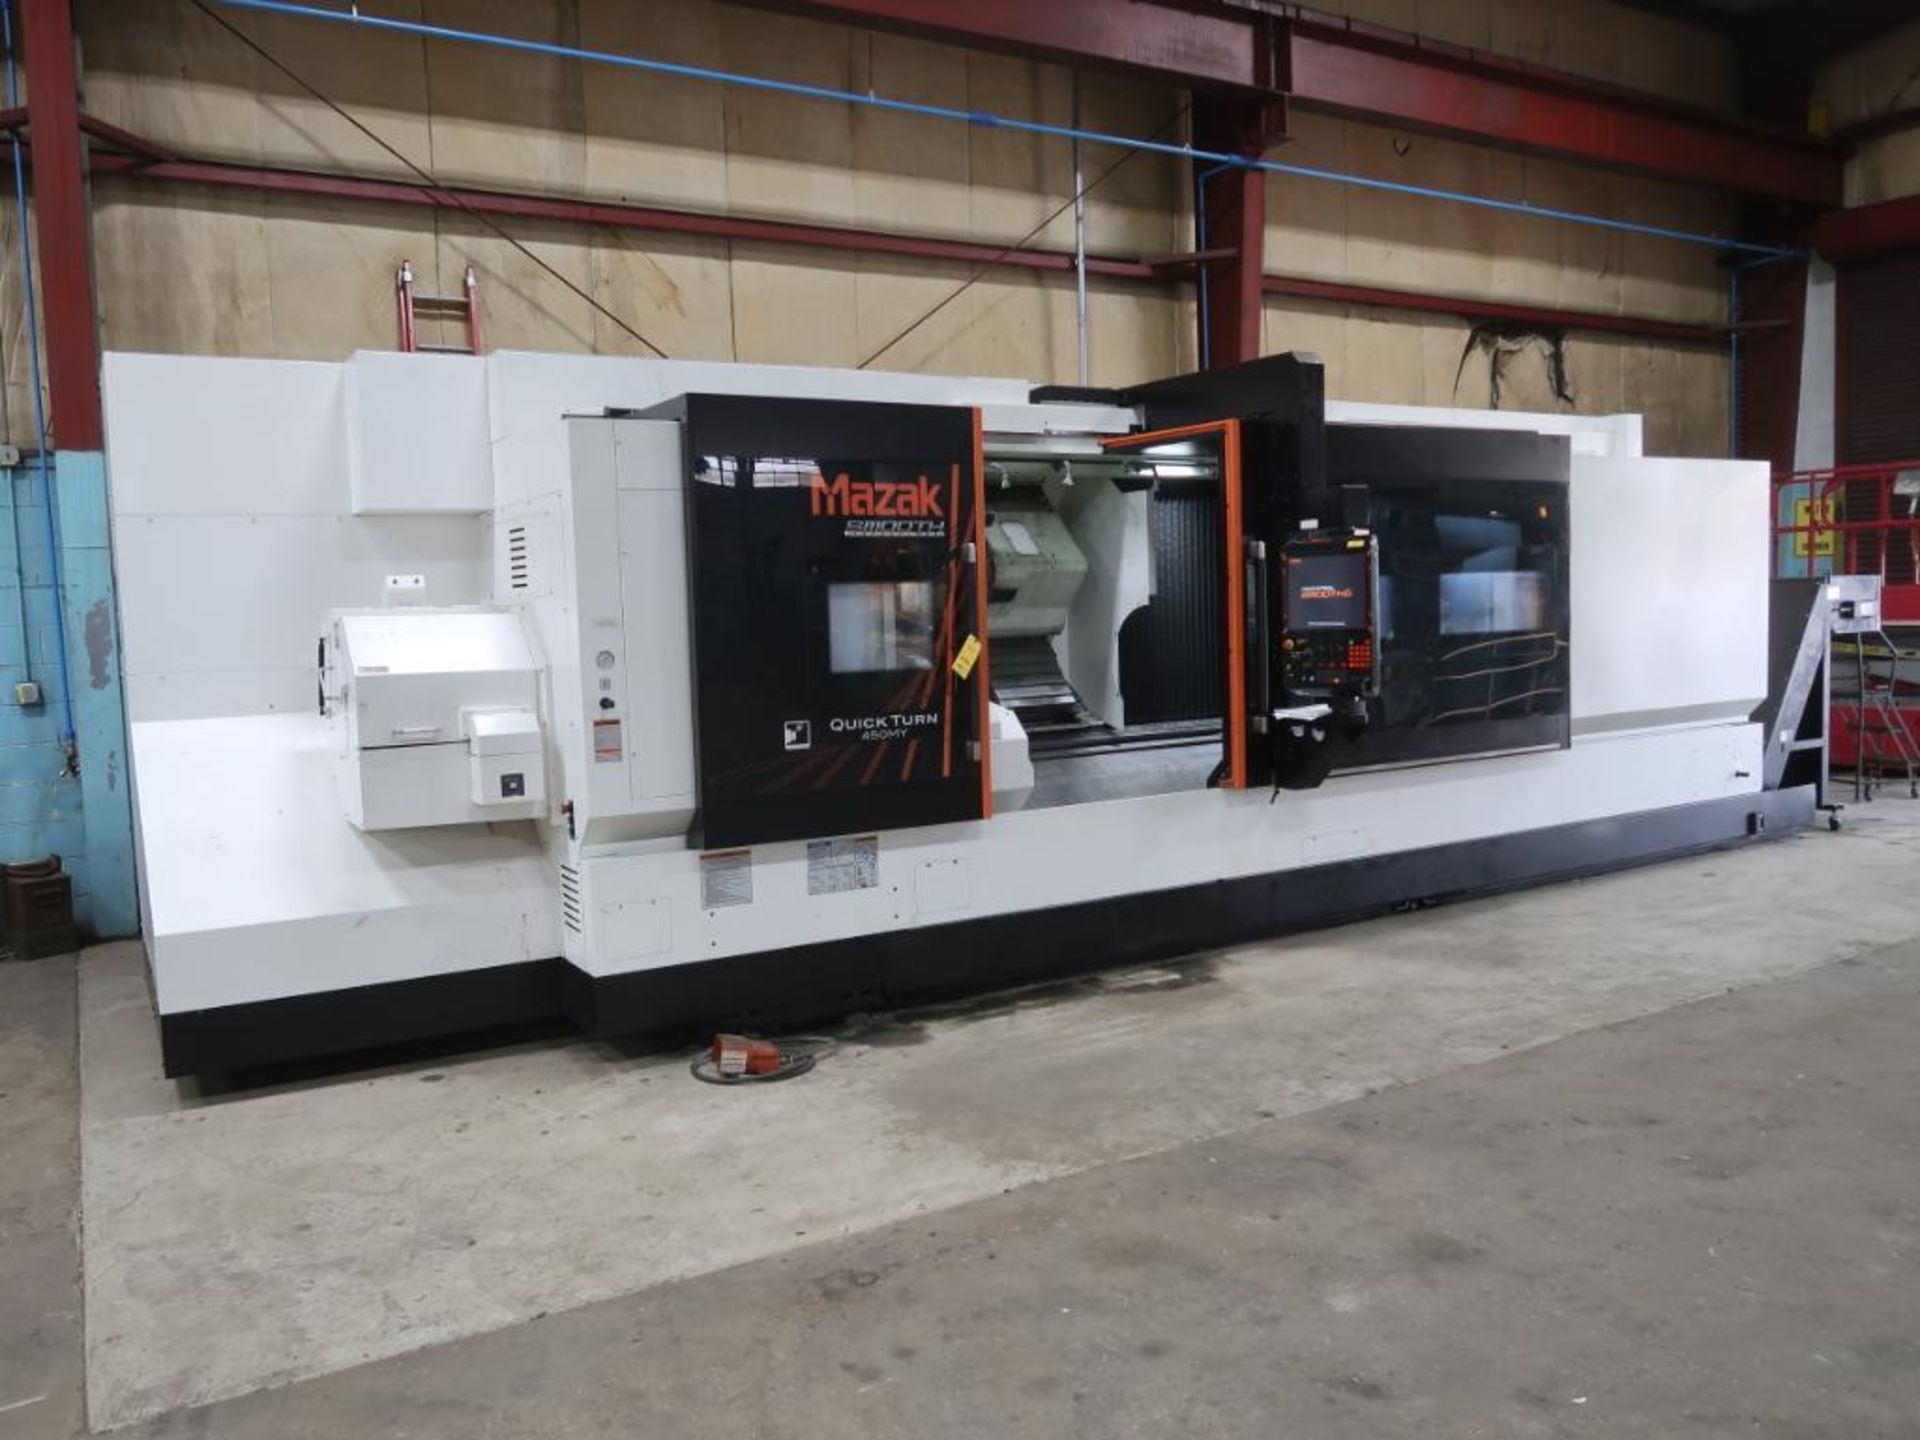 Mazak Smooth Technology 33 in. x 83 in. CNC Turning Center Model Quick Turn 450MY, S/N 296661 (2019)